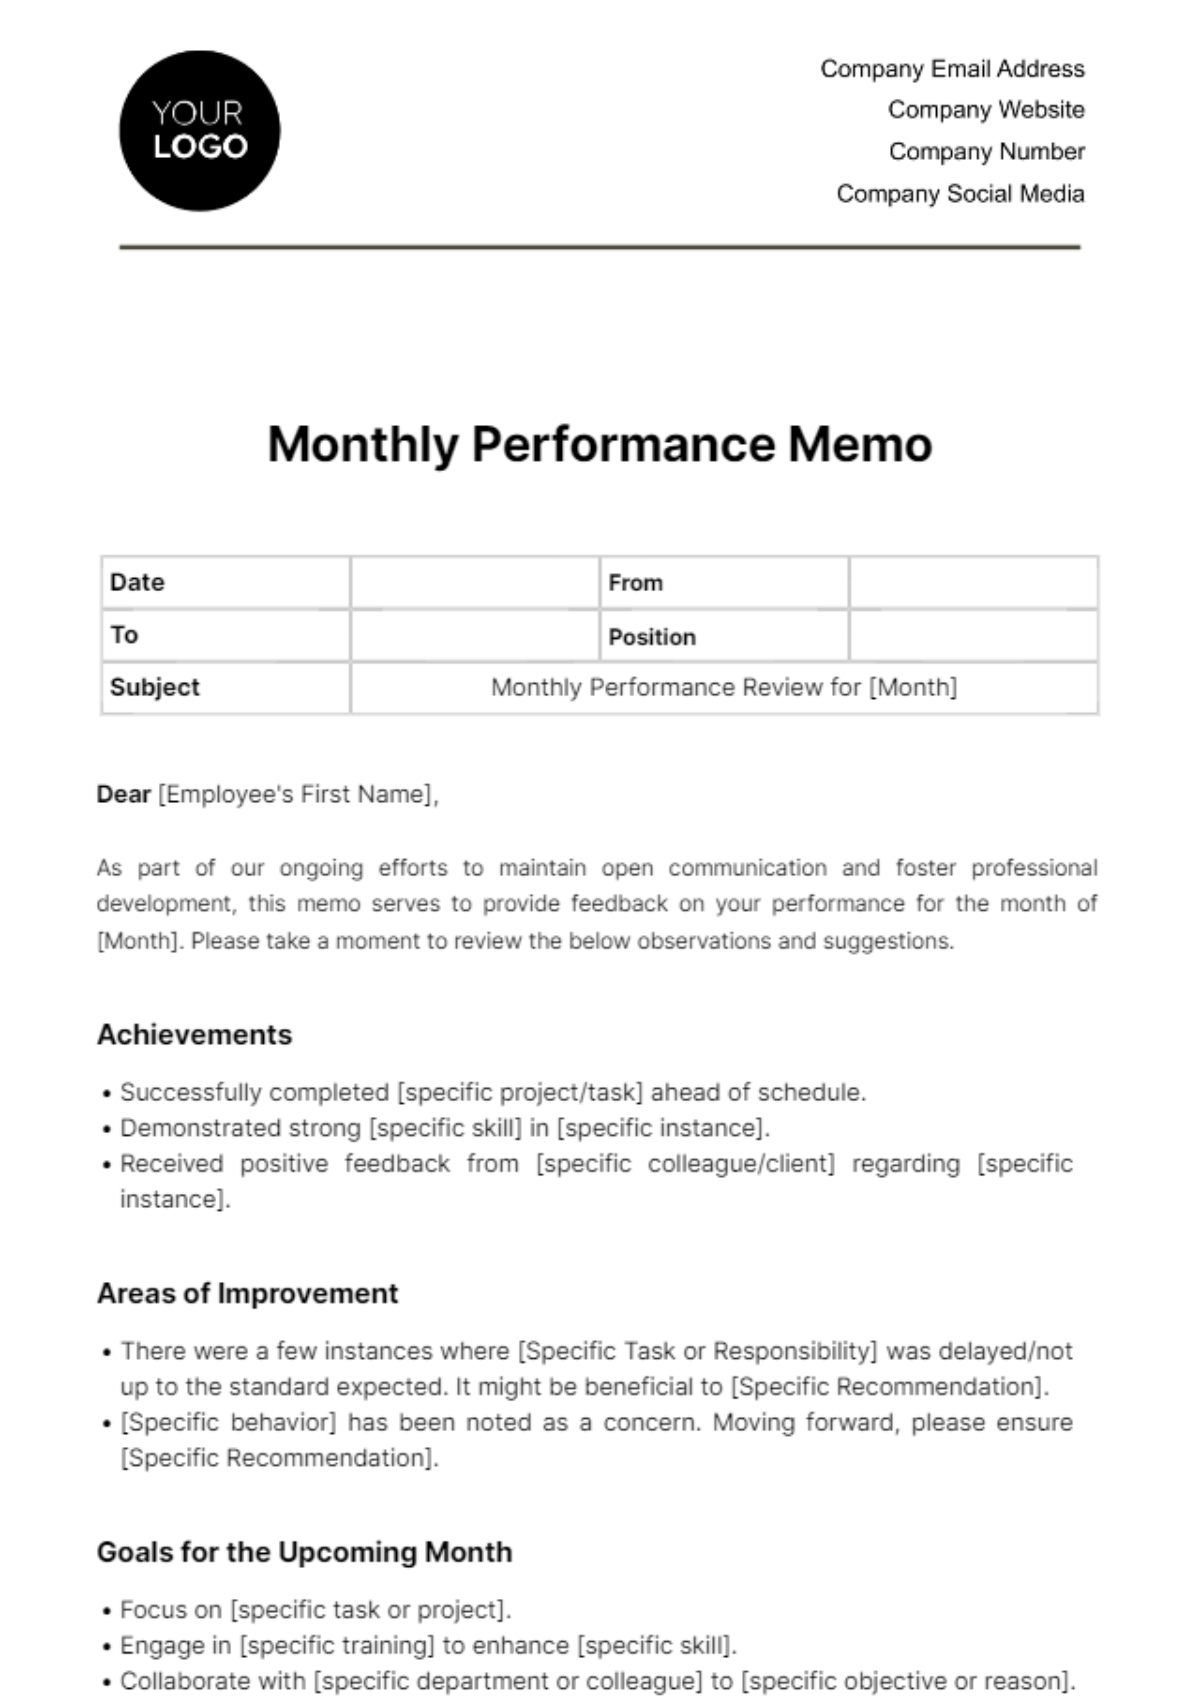 Monthly Performance Memo HR Template